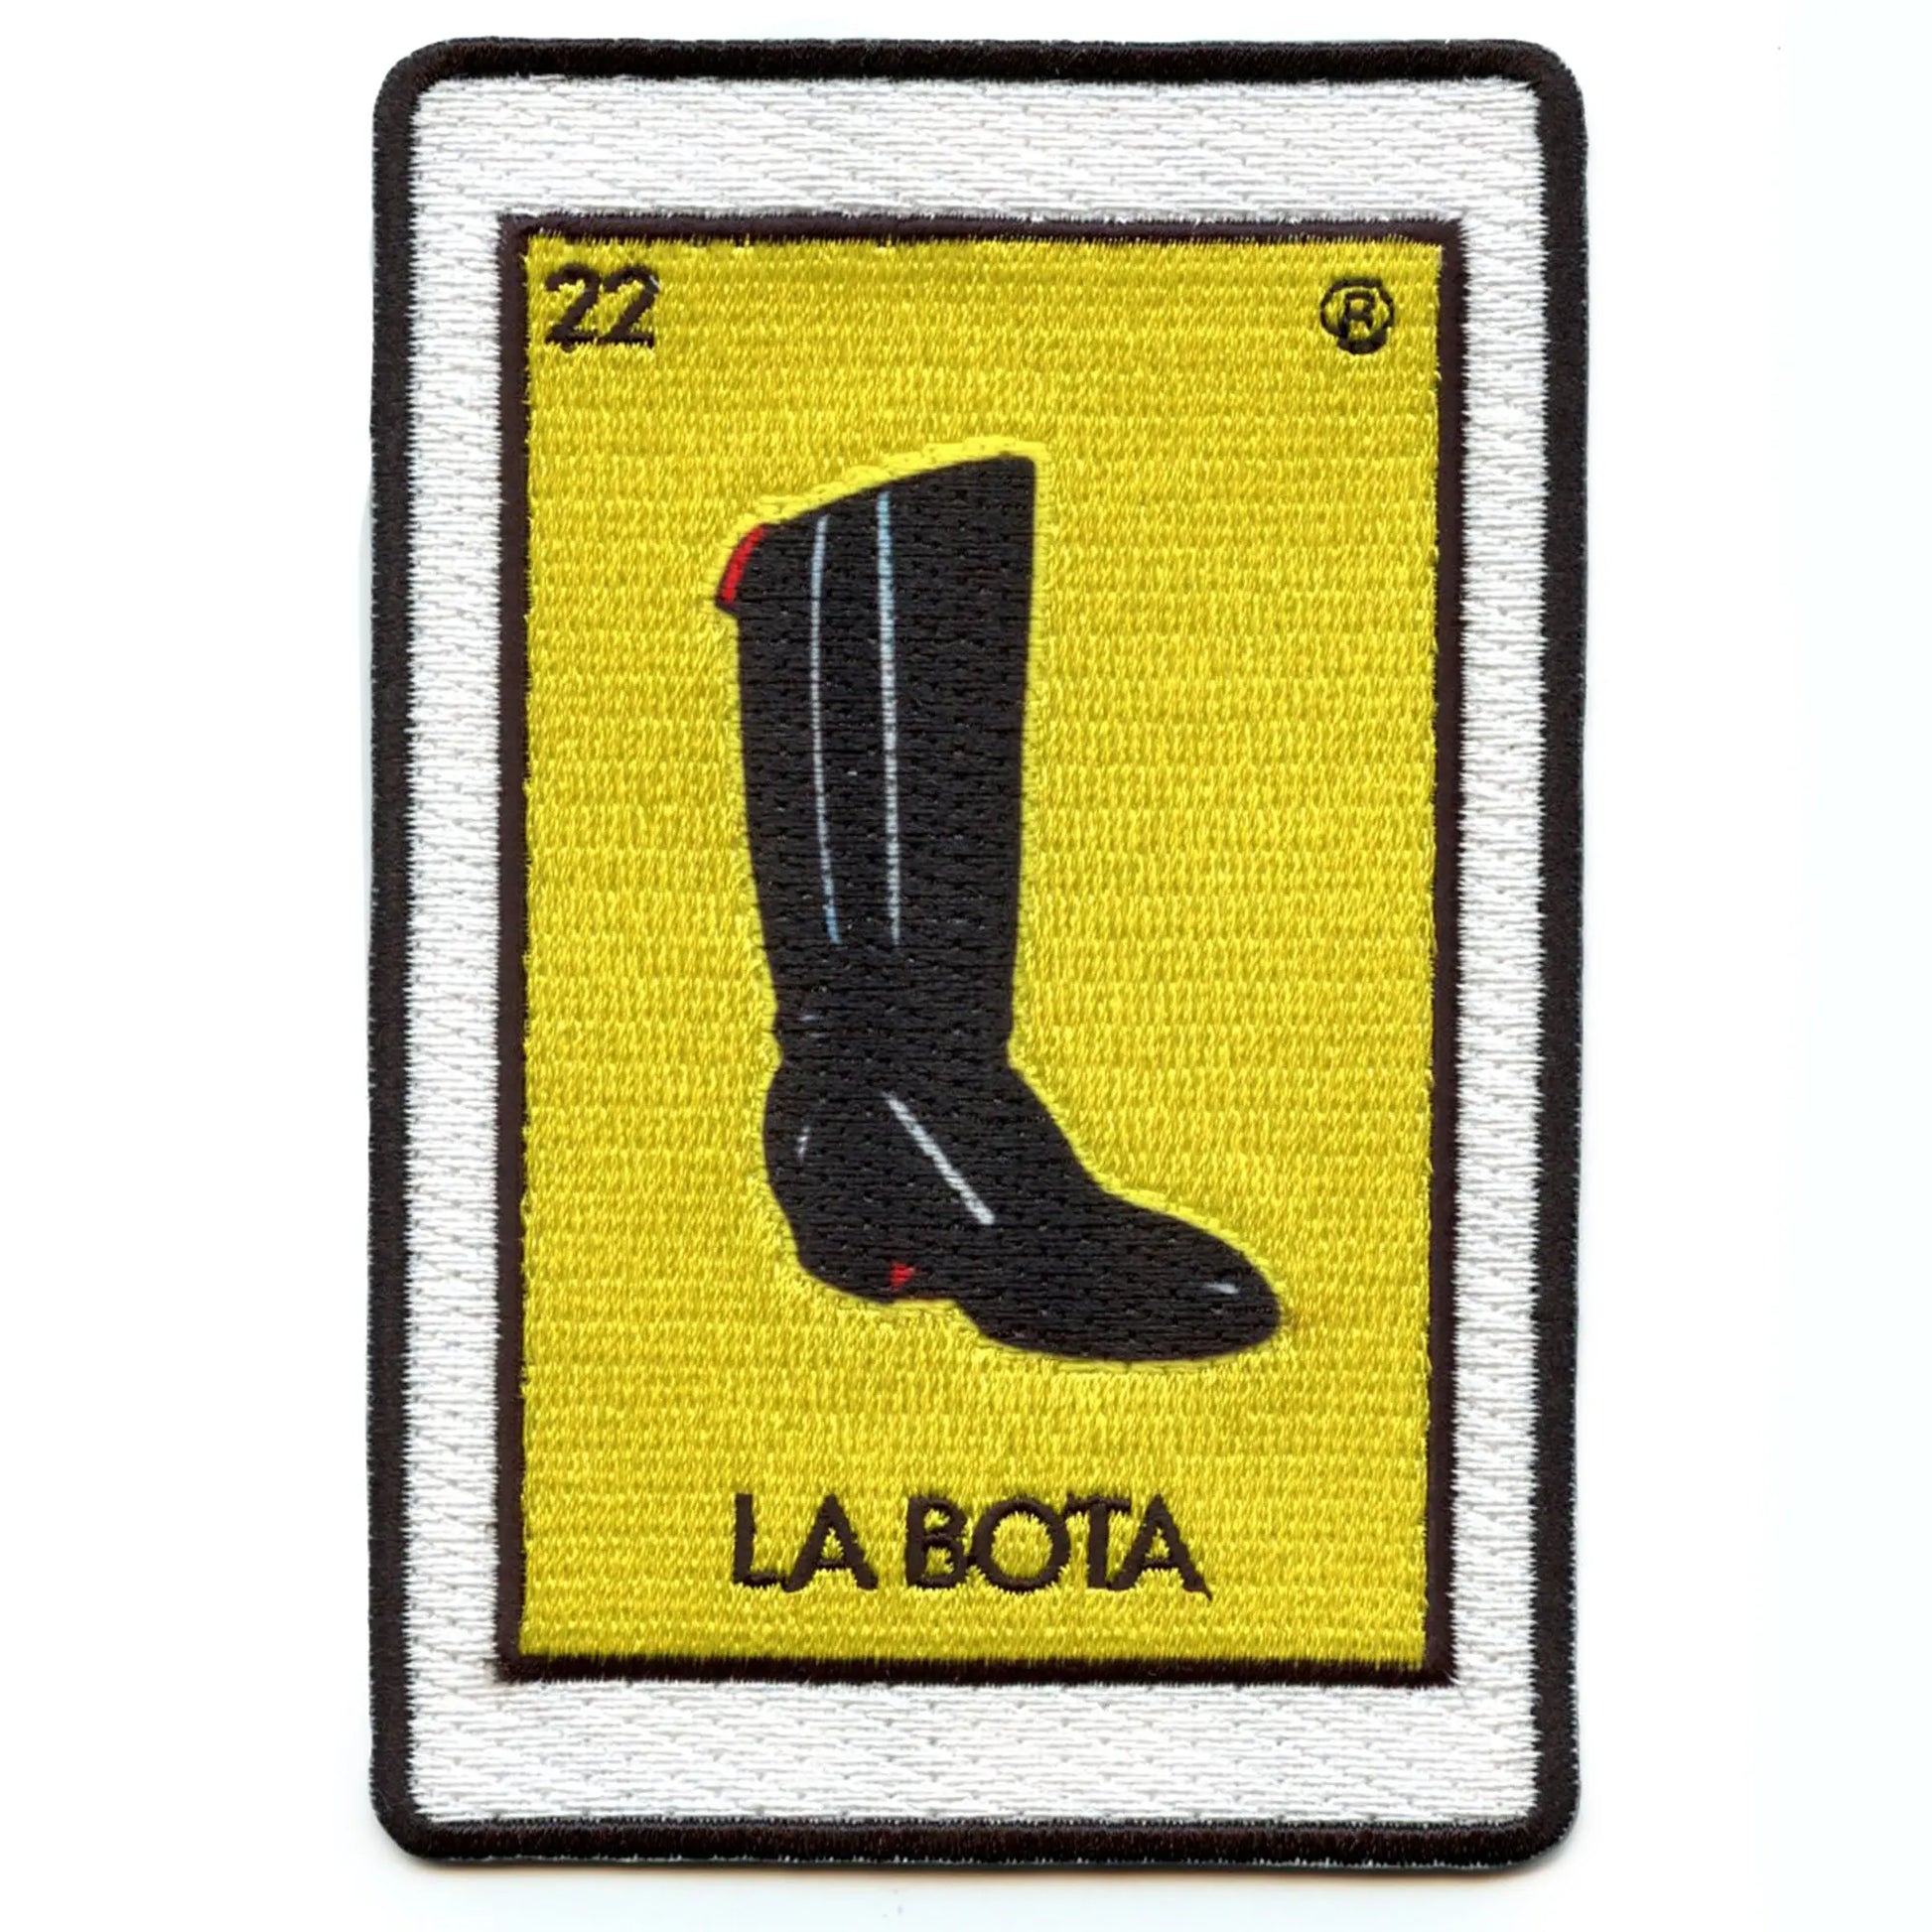 La Bota 22 Patch Mexican Loteria Card Sublimated Embroidery Iron On